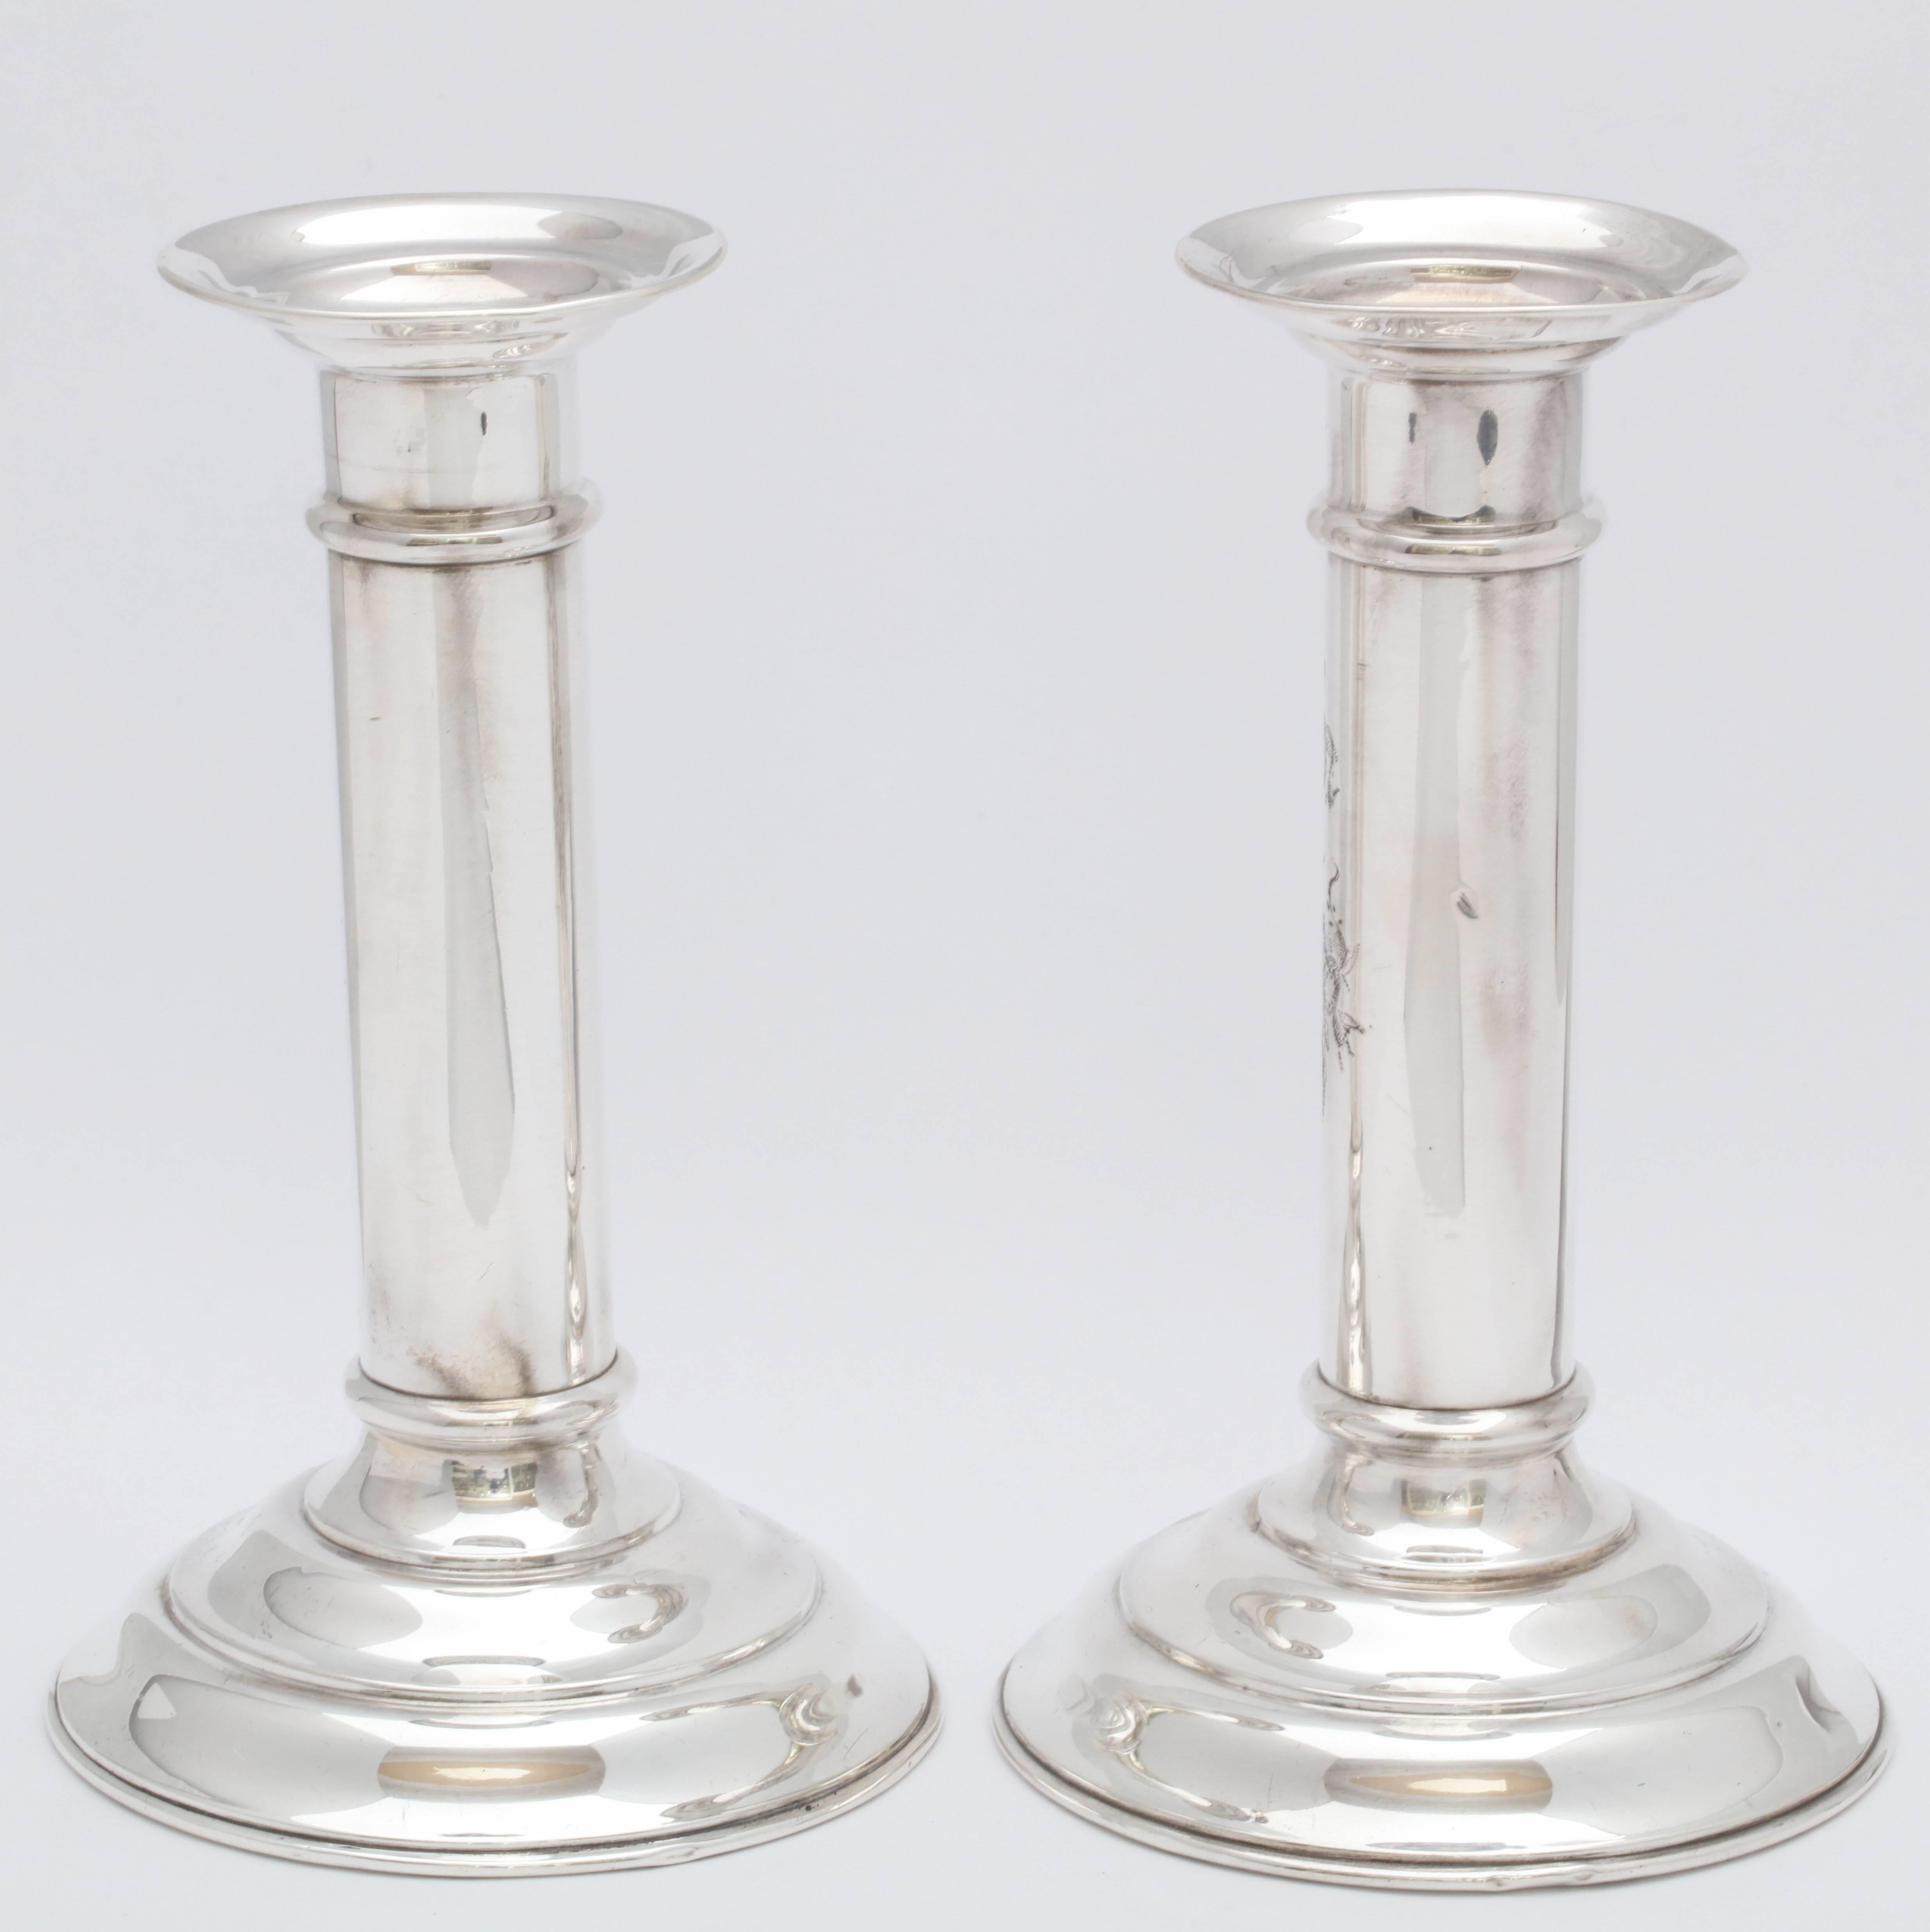 Early 20th Century Pair of Edwardian Sterling Silver Column-Form Candlesticks